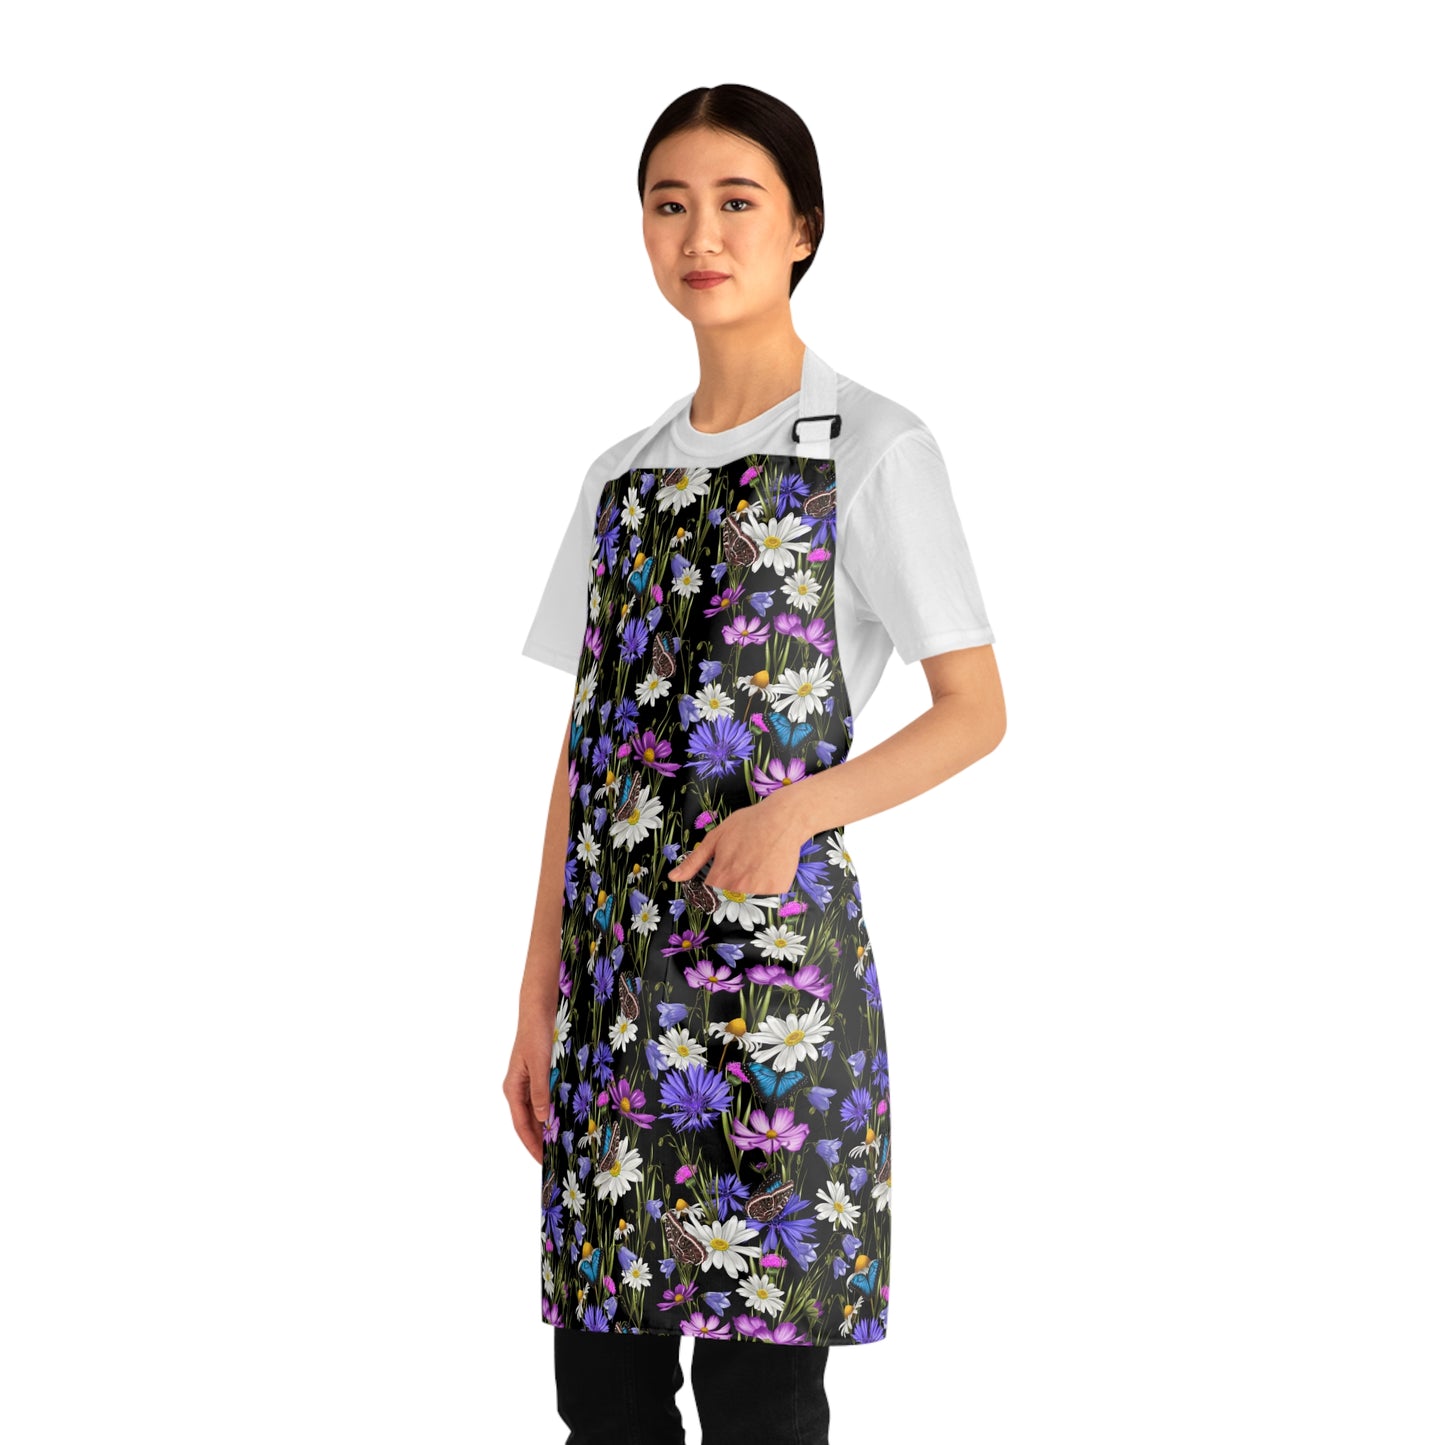 Purple and white wildflowers Apron with cute butterflies. Mothers Day gift for garden lover or grandma